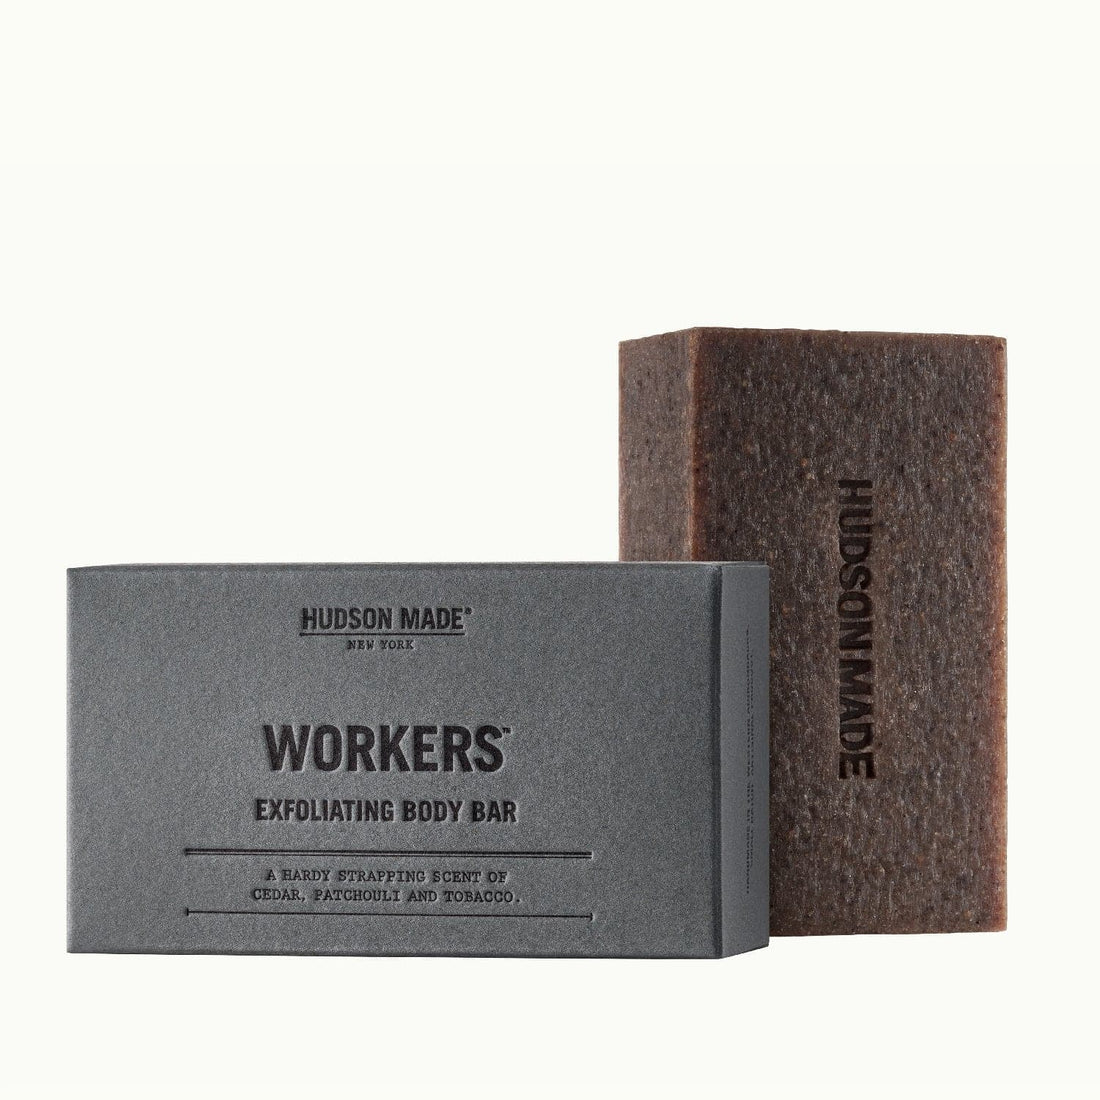 Hudson Made Workers Exfoliating Body Bar with a Strapping Scent of Cedar, Patchouli and Tobacco. 